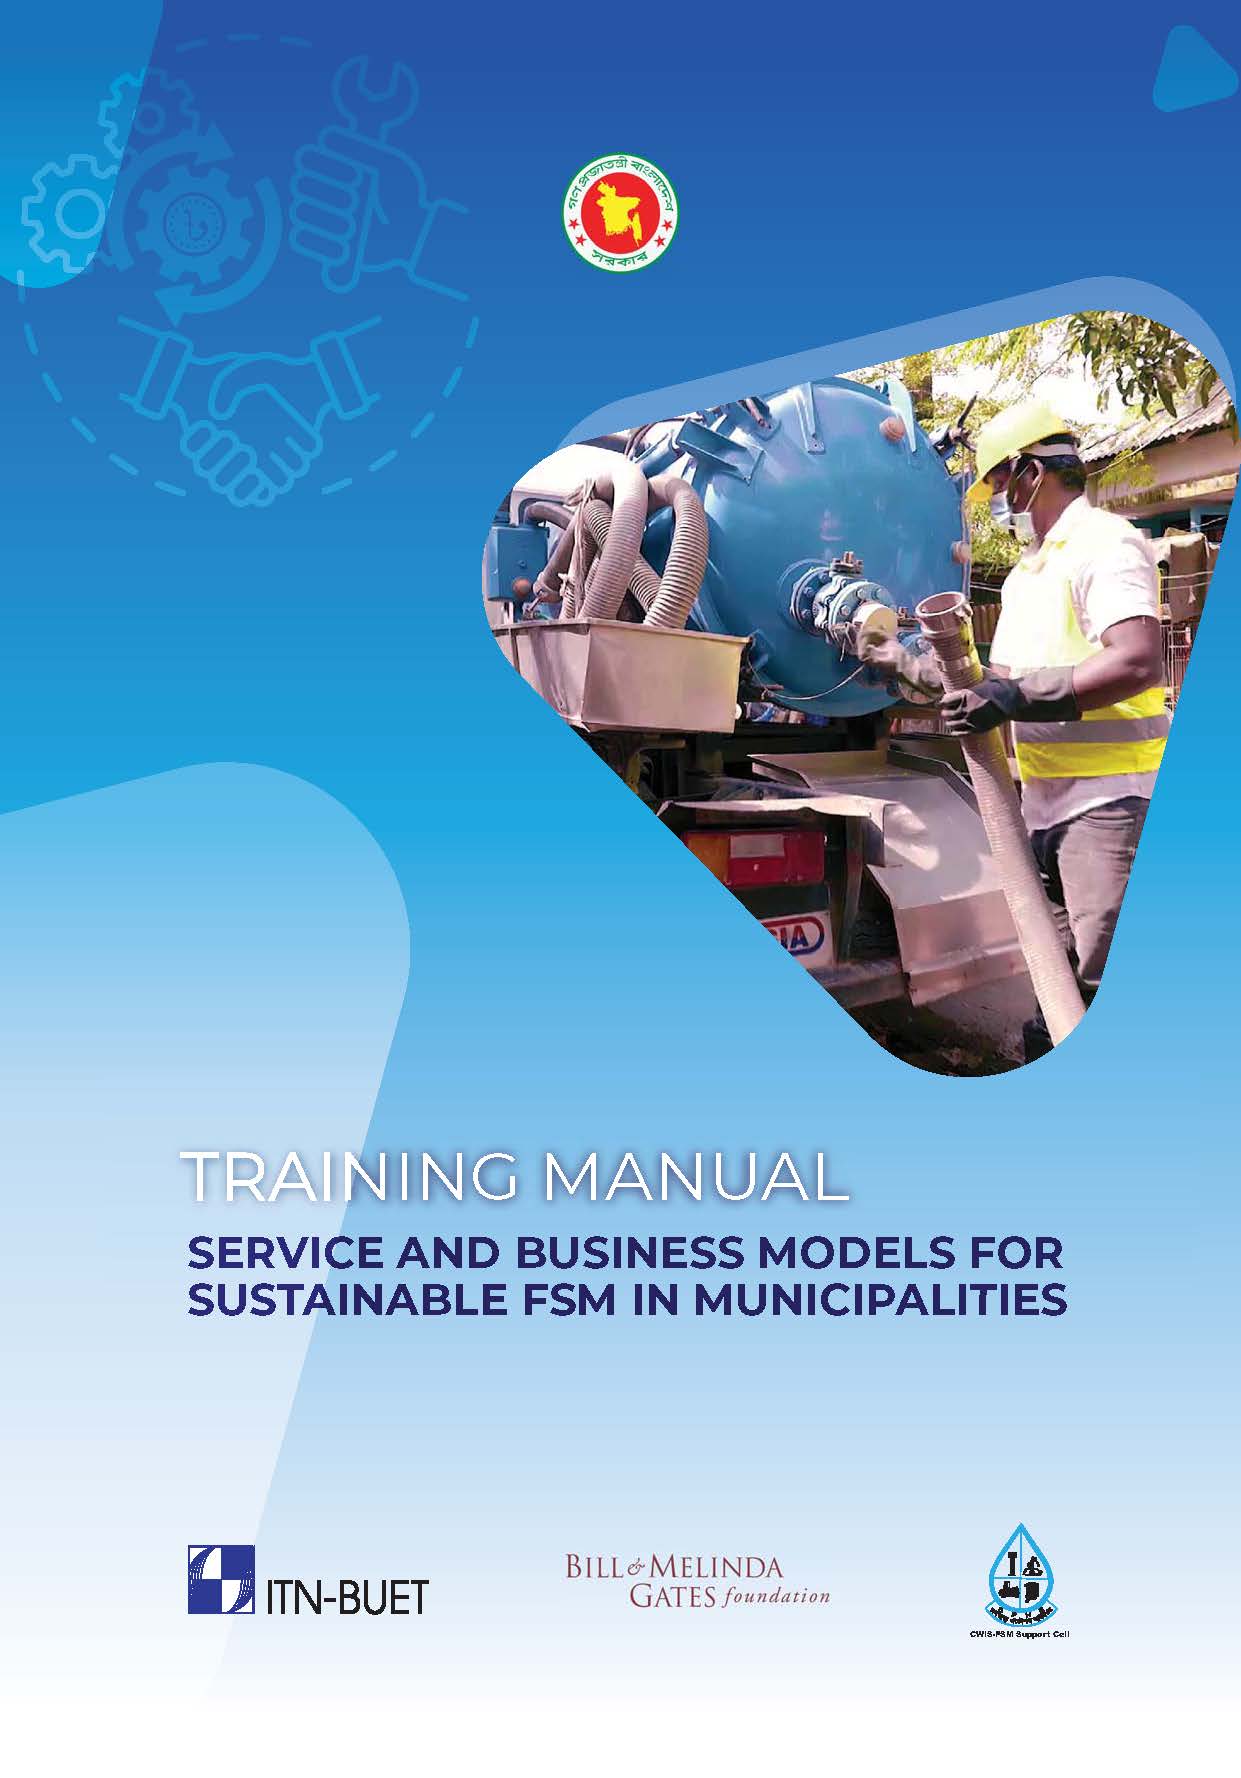 Training manual on Service and Business Models for Sustainable FSM in Municipalities